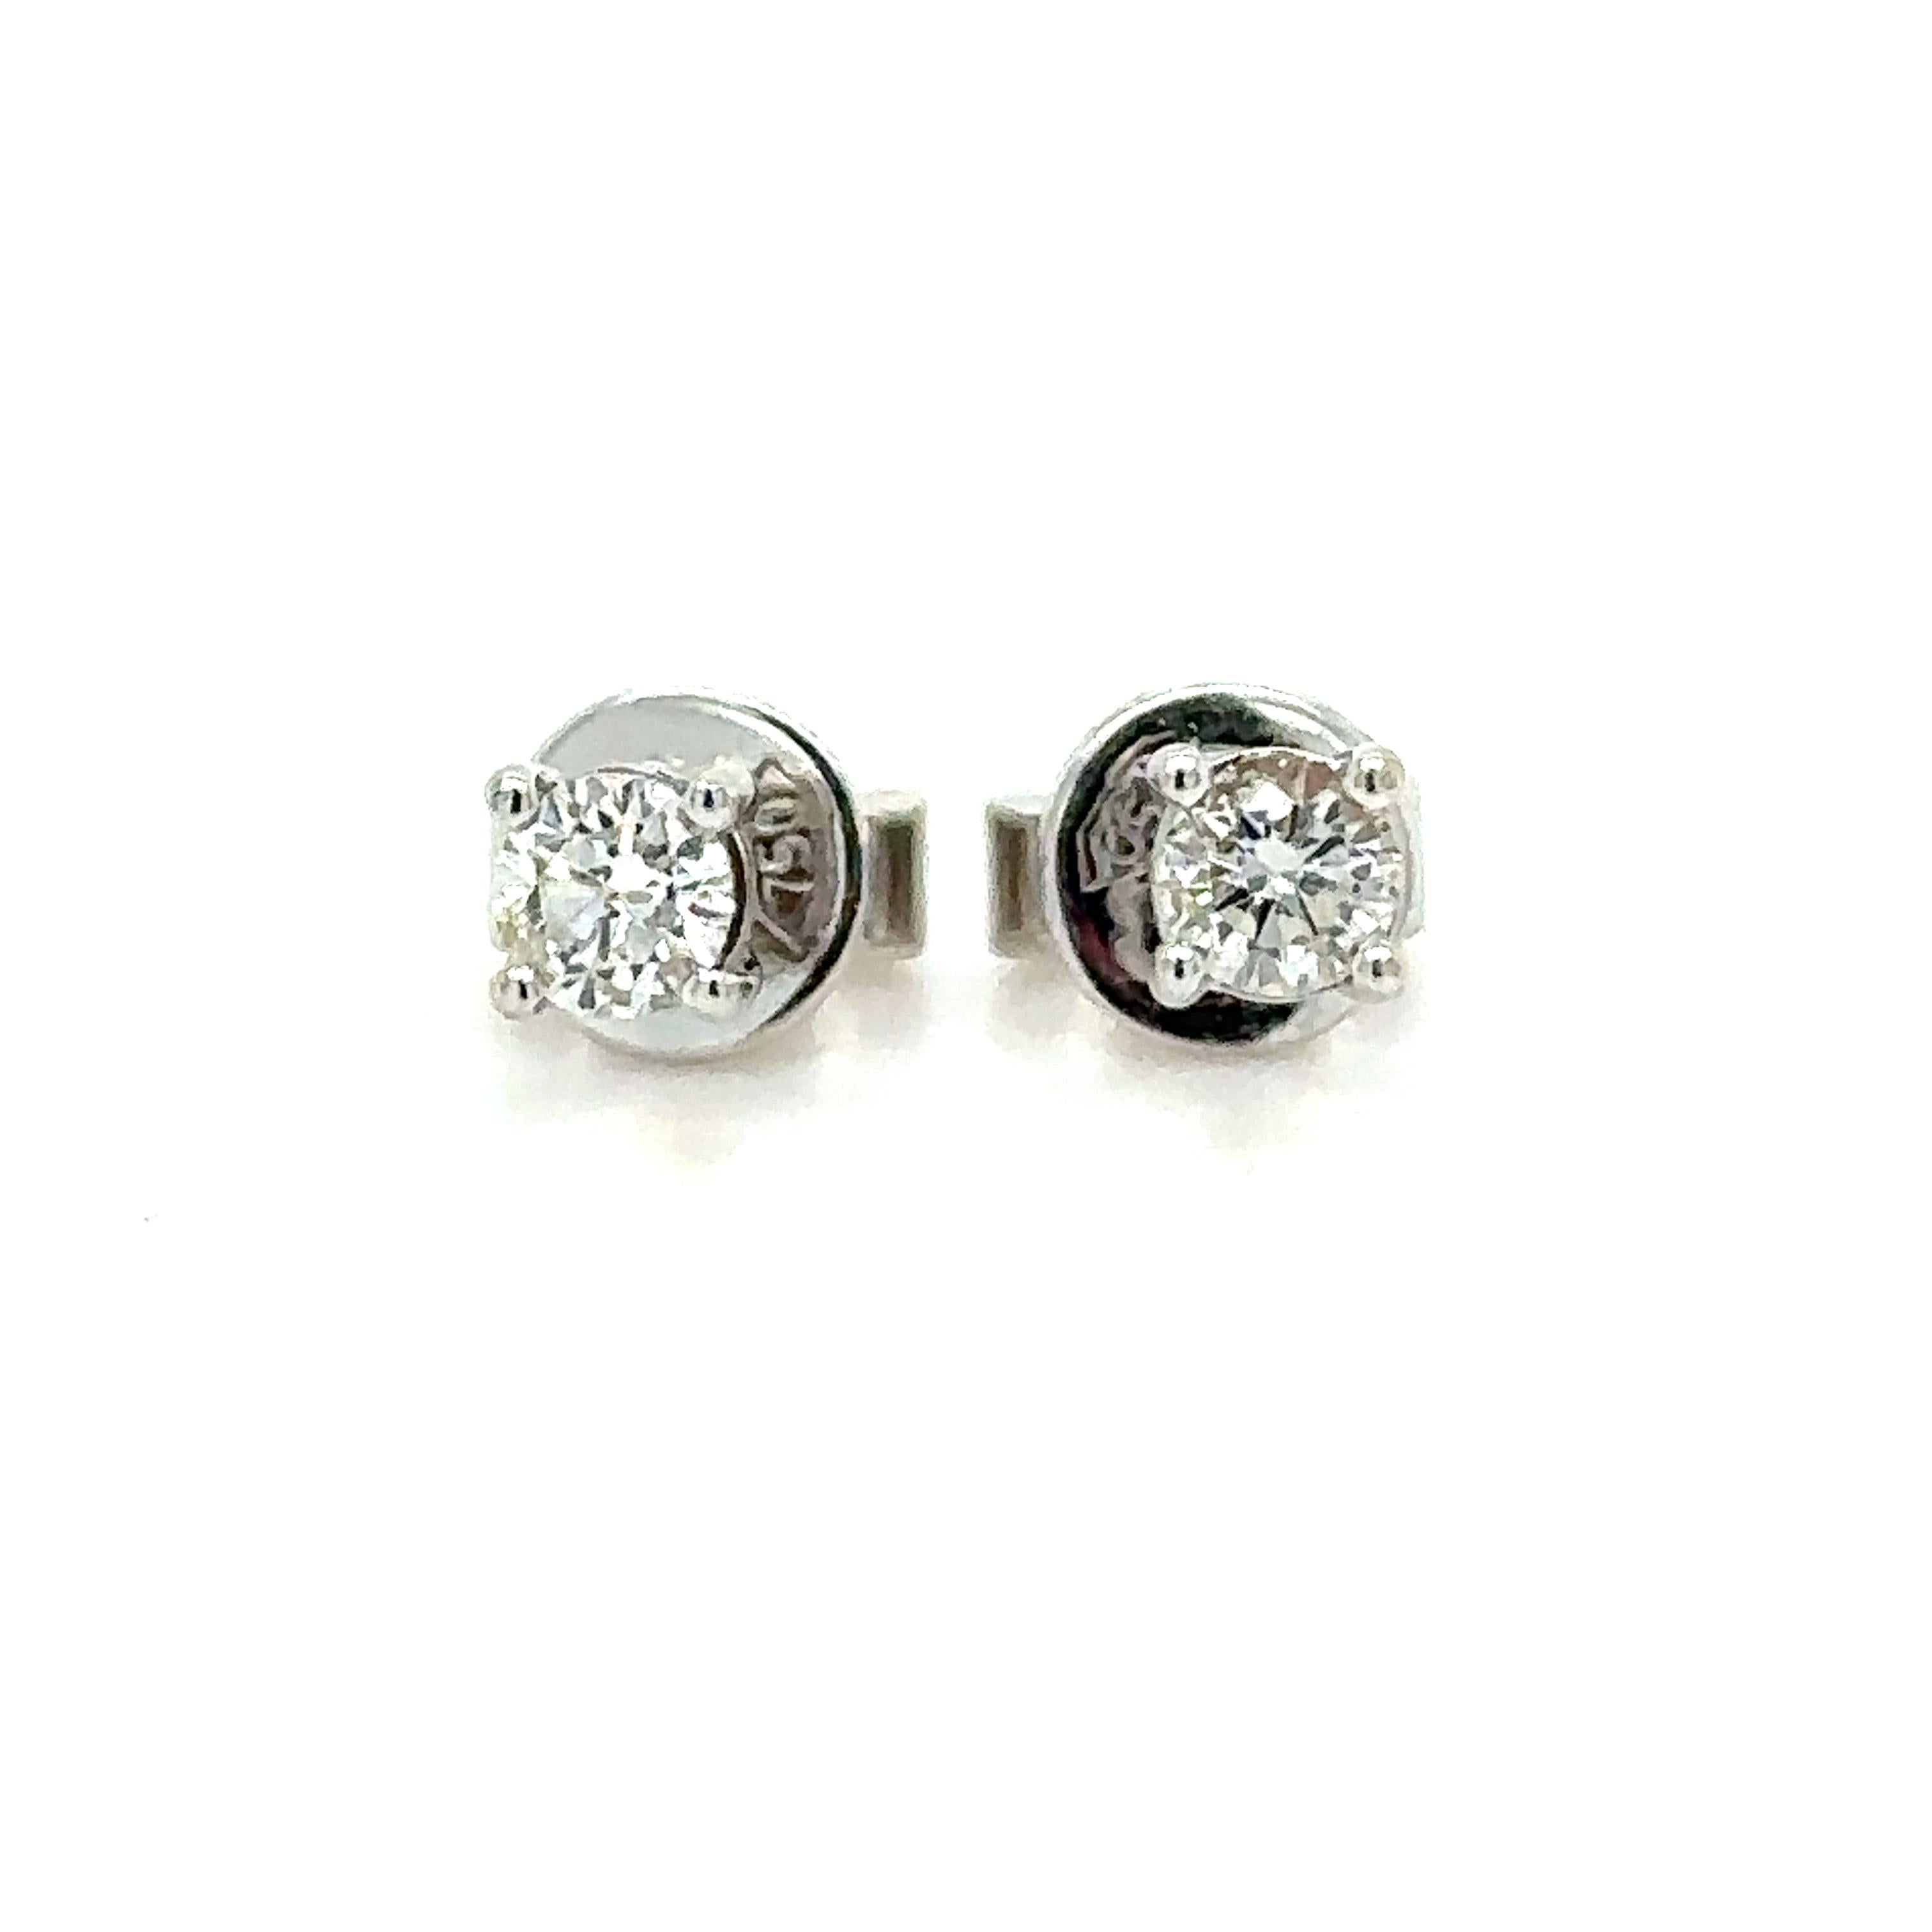 Unique features:

Diamond stud earrings. Made of 18ct White Gold, and weighing 1.6 gm.

Set with 2 round, brilliant cut Diamonds, colour G-H and clarity VS-SI. with a total weight of 0.30ct.

Metal: 18ct White Gold
Carat: 0.30ct
Colour: G-H
Clarity: